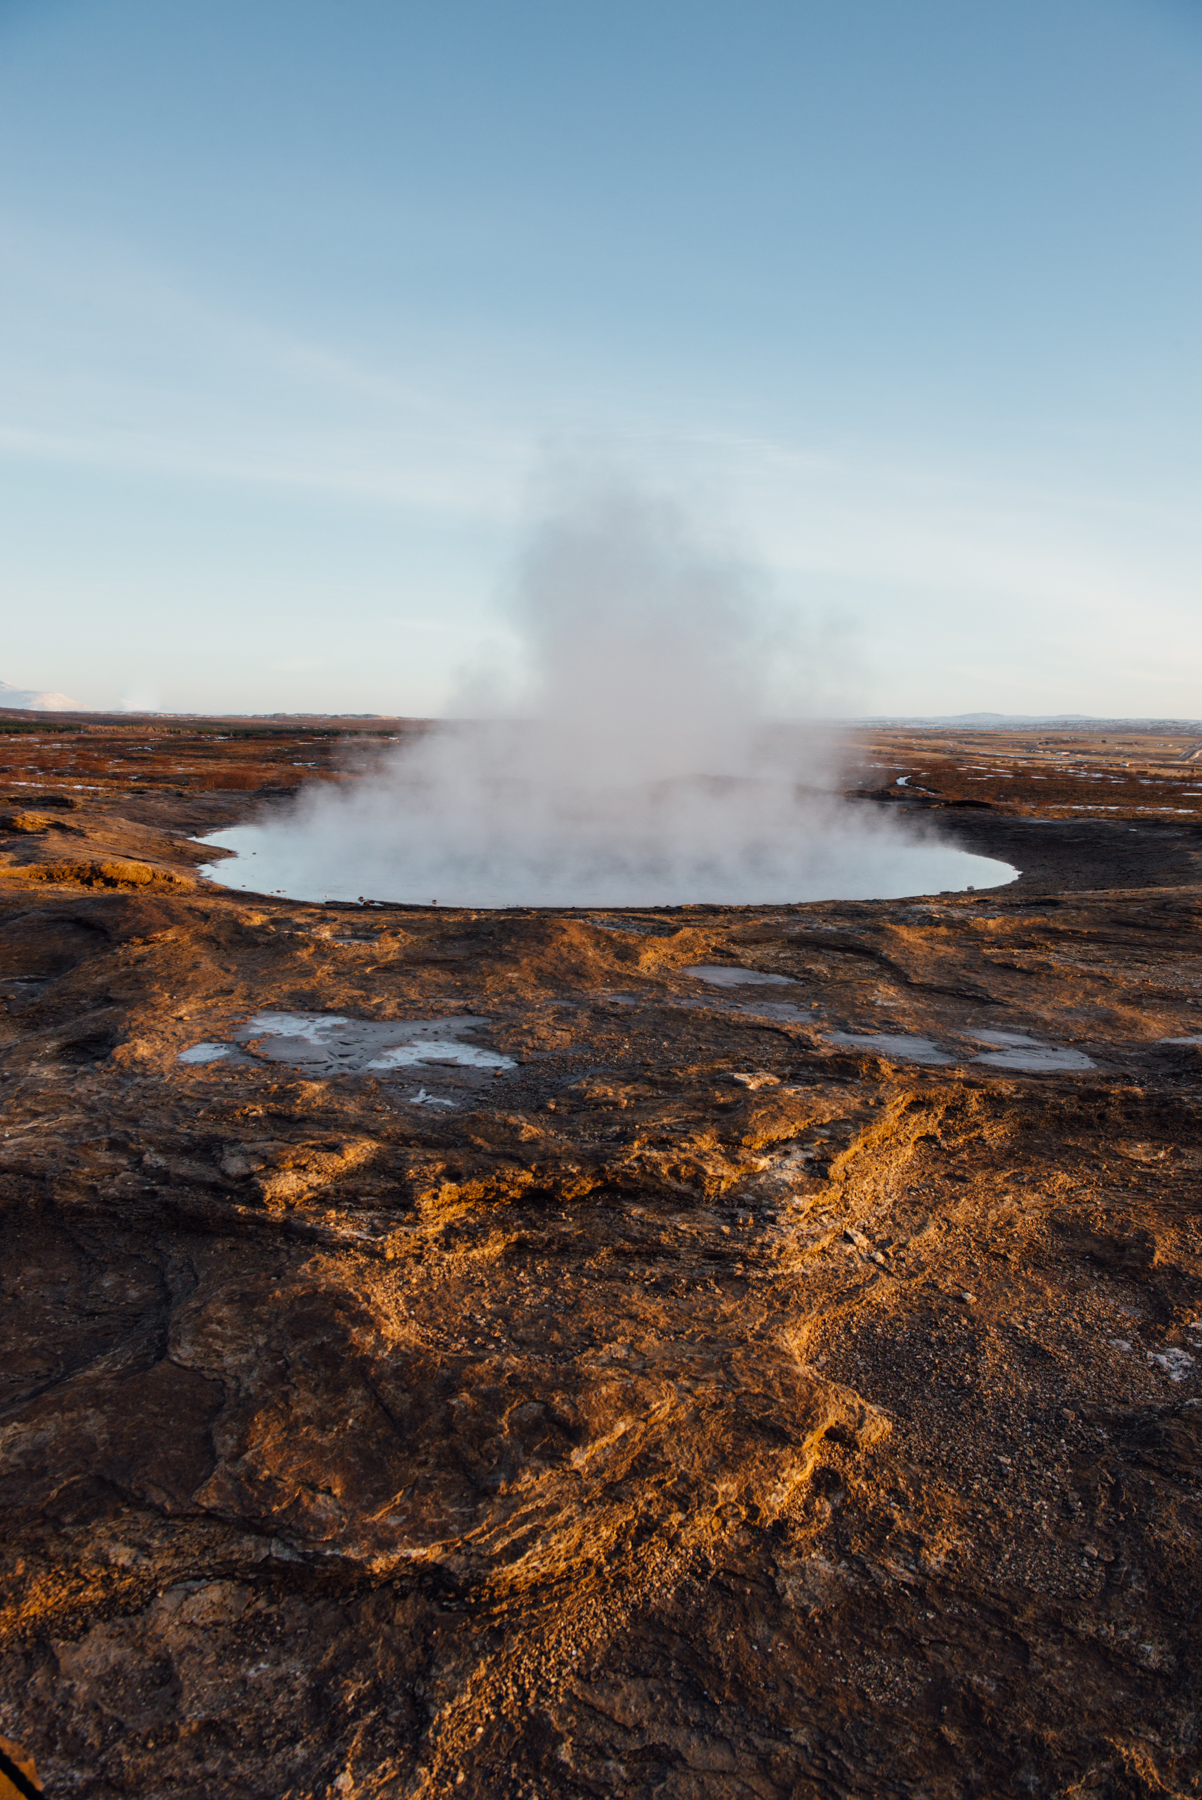 Iceland – Golden Circle, Strokkur Geysir. Trip to Iceland with Katie and Holly 1/1-1/7.